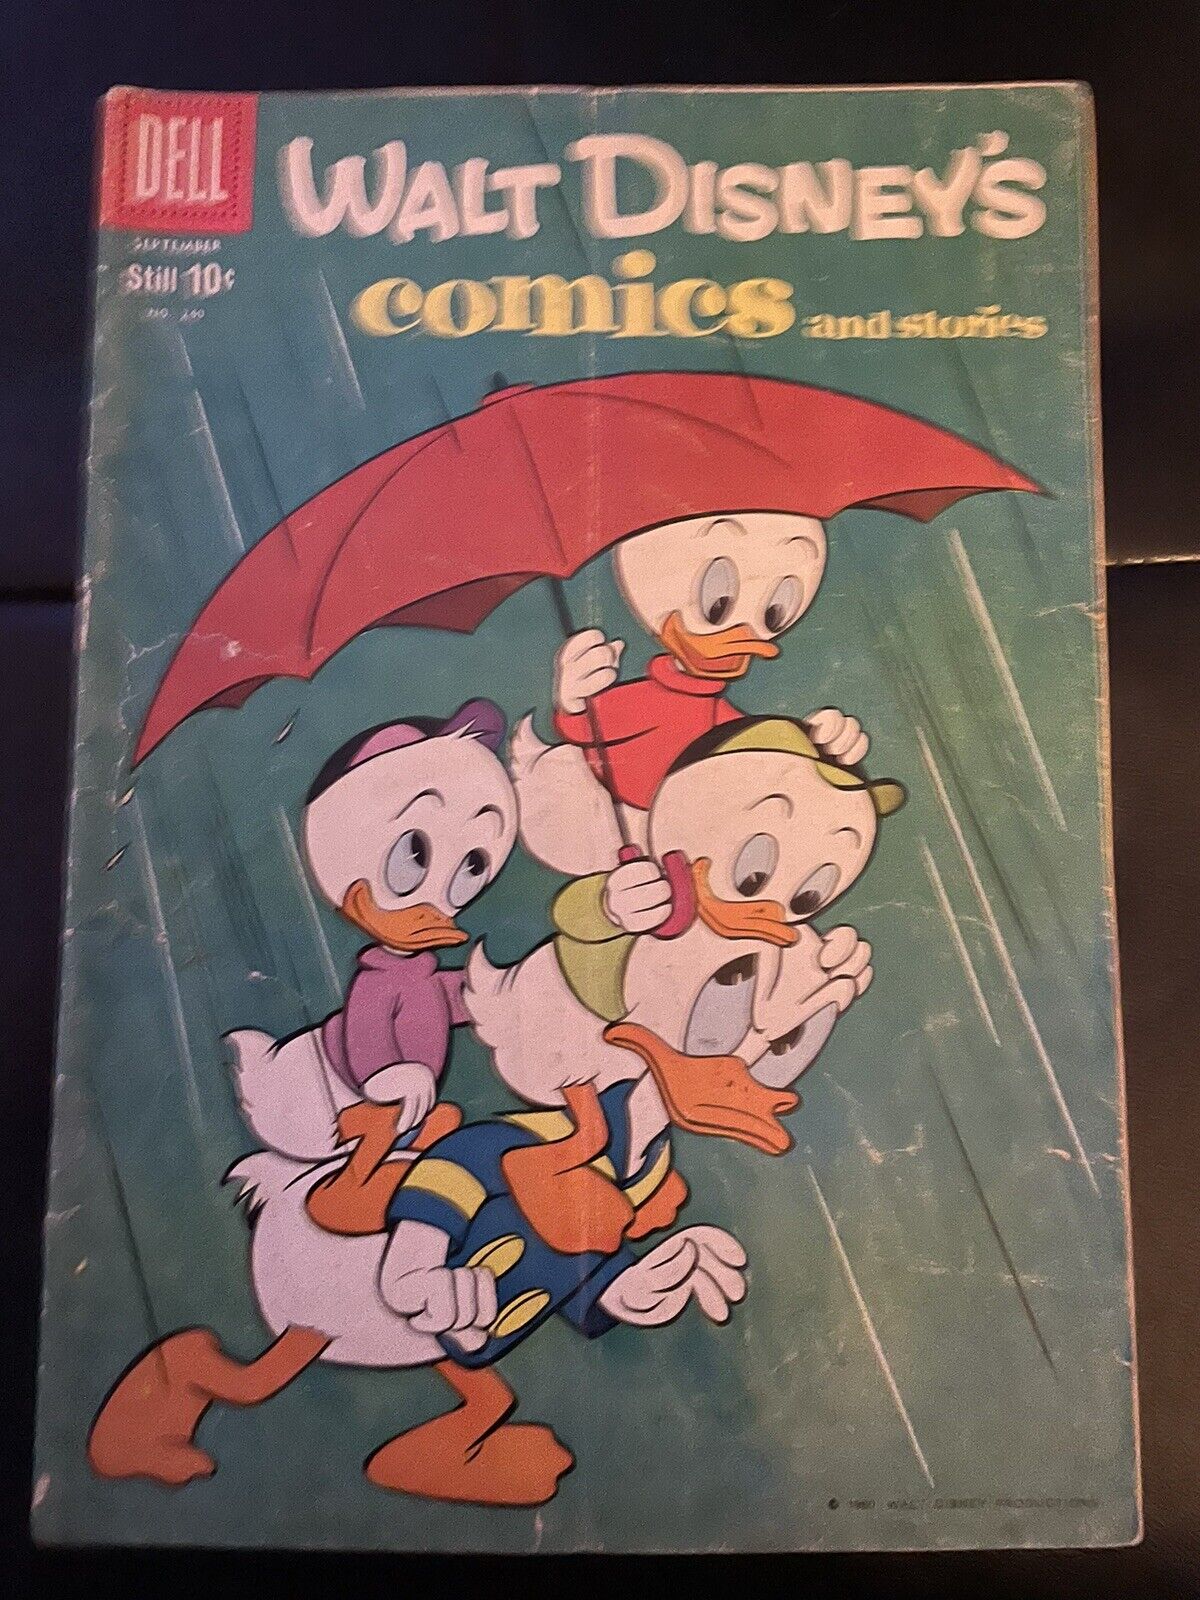 Dell Walt Disney's Comics And Stories #240 1960 - slight tear on the cover